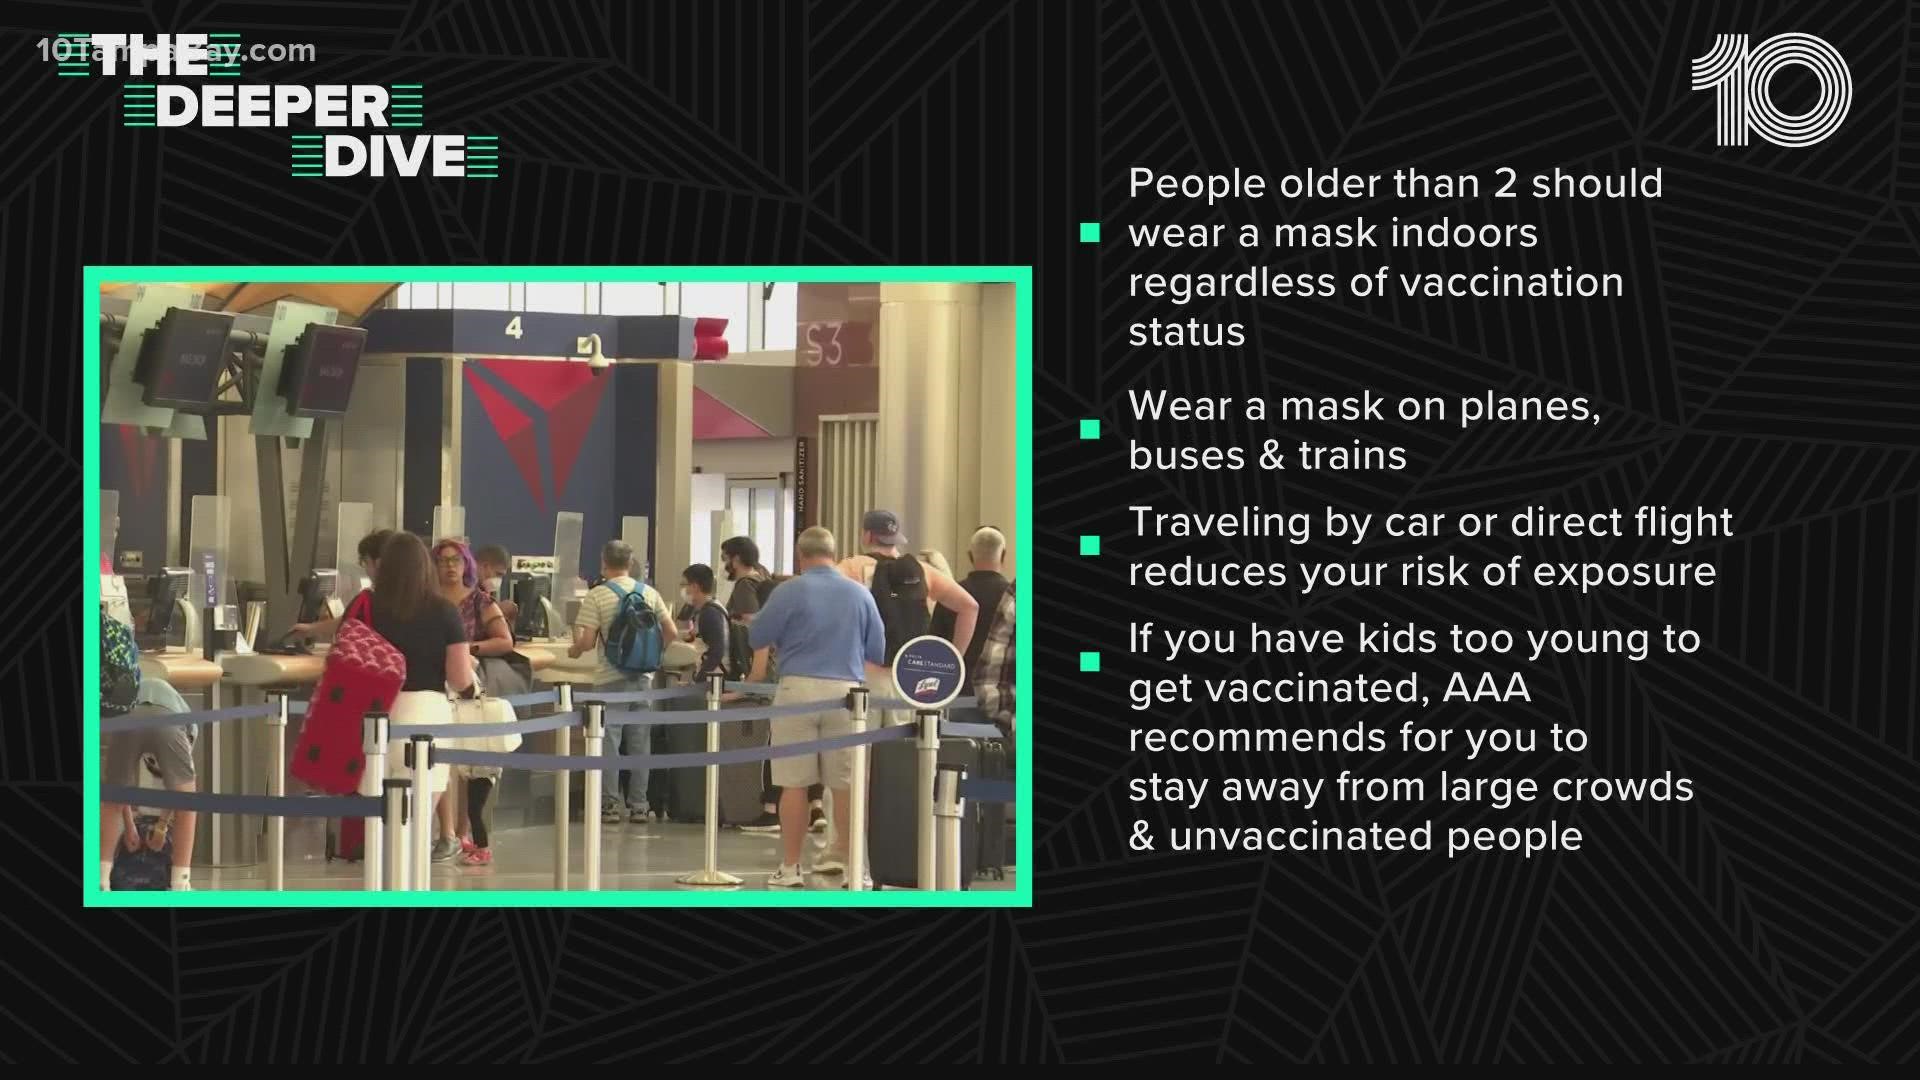 Recommendations include people 2 and older wearing a mask on all forms of public transportation.